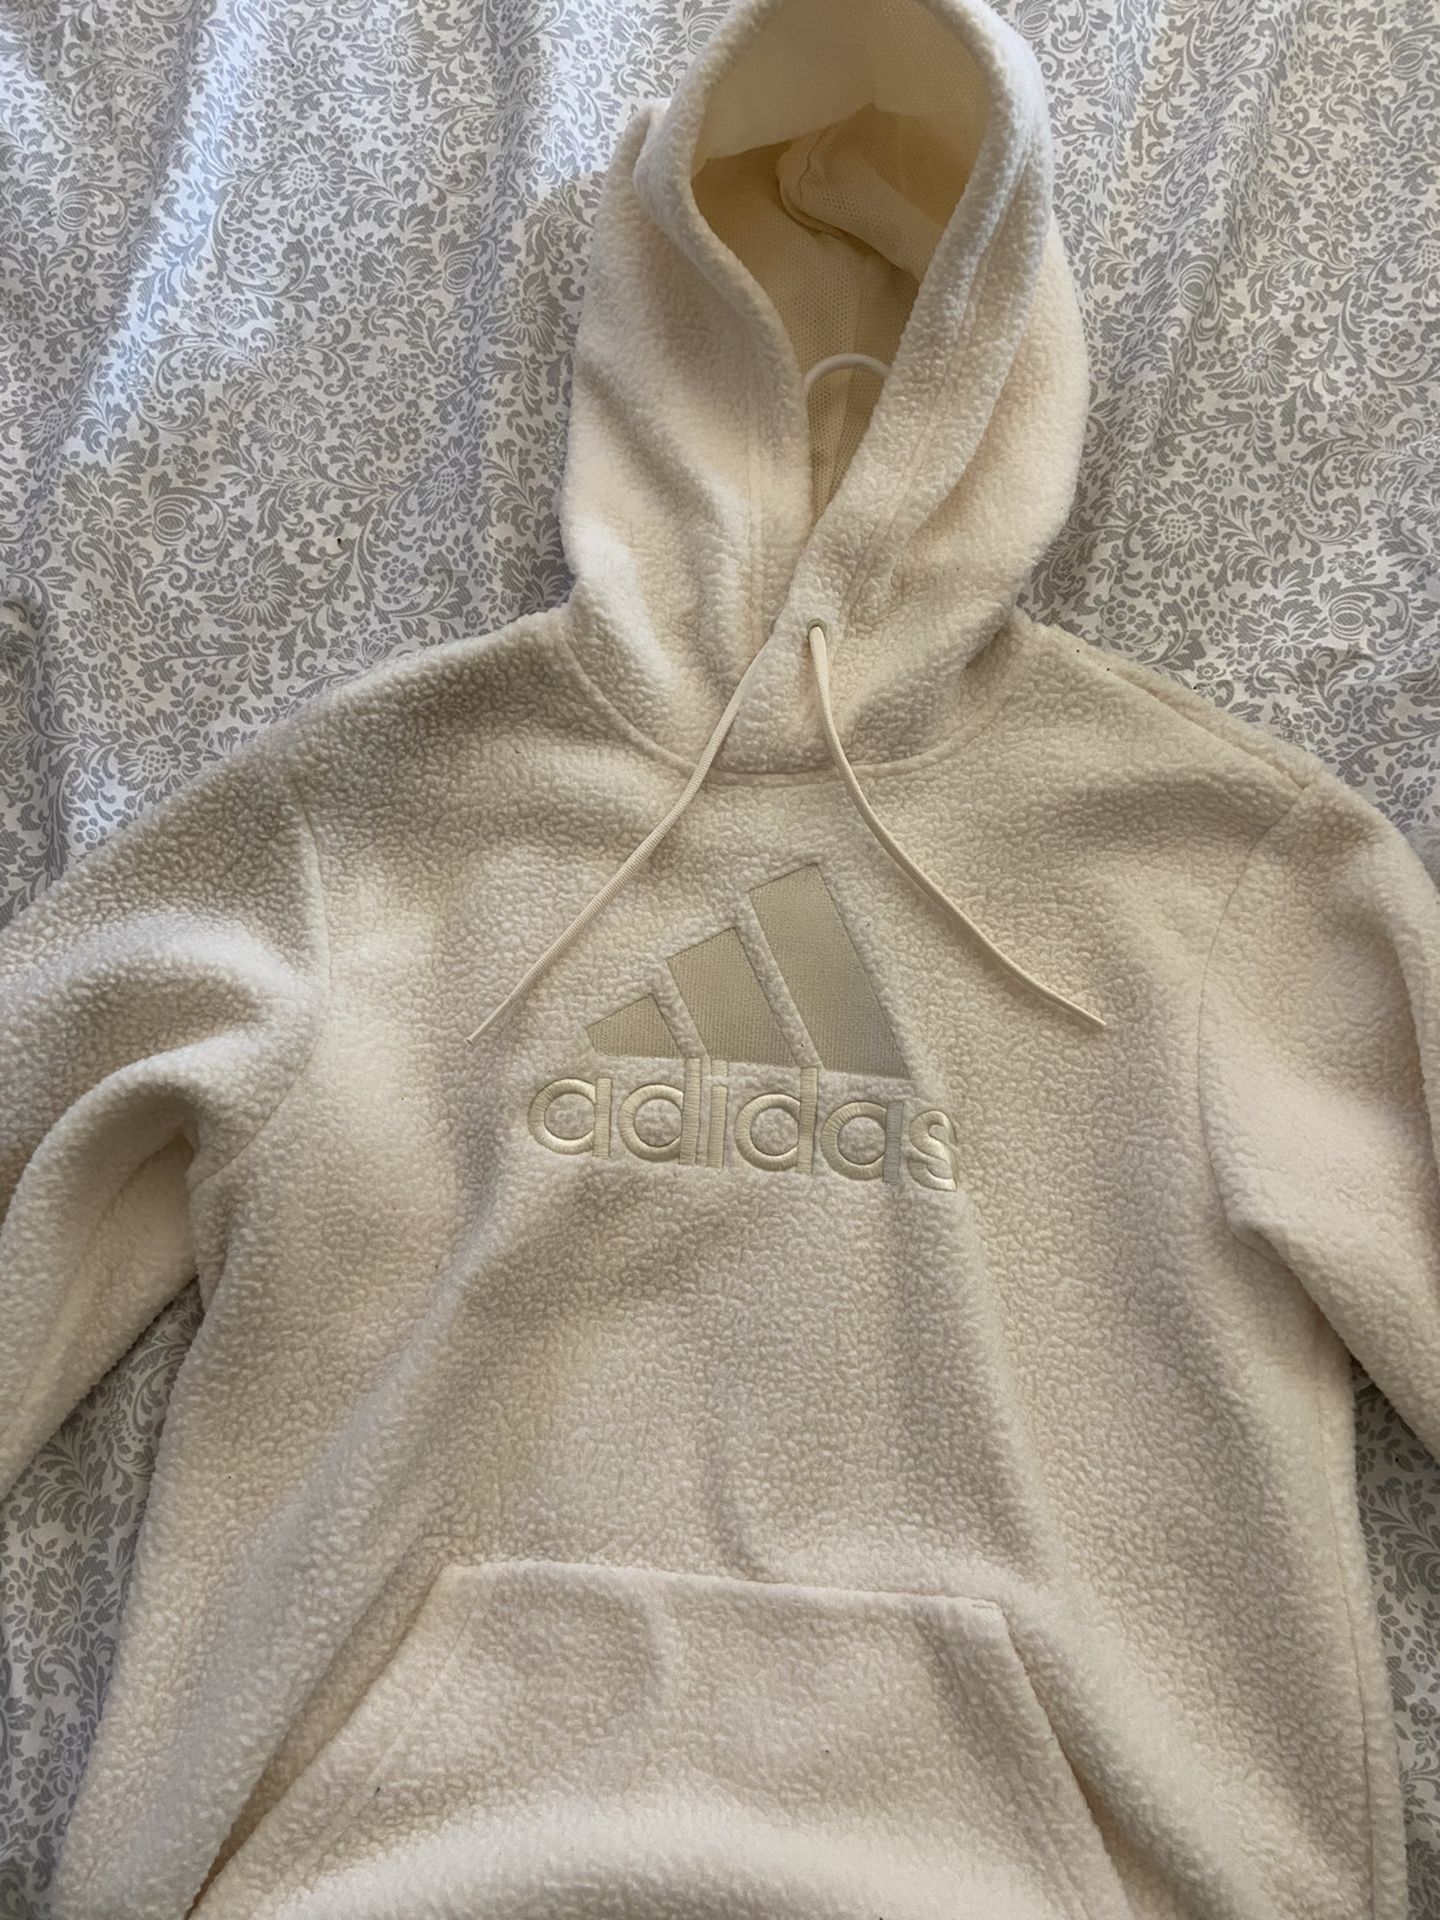 Adidas Sherpa hoodie new with tags! DM your offer :) for Sale Anaheim, CA - OfferUp